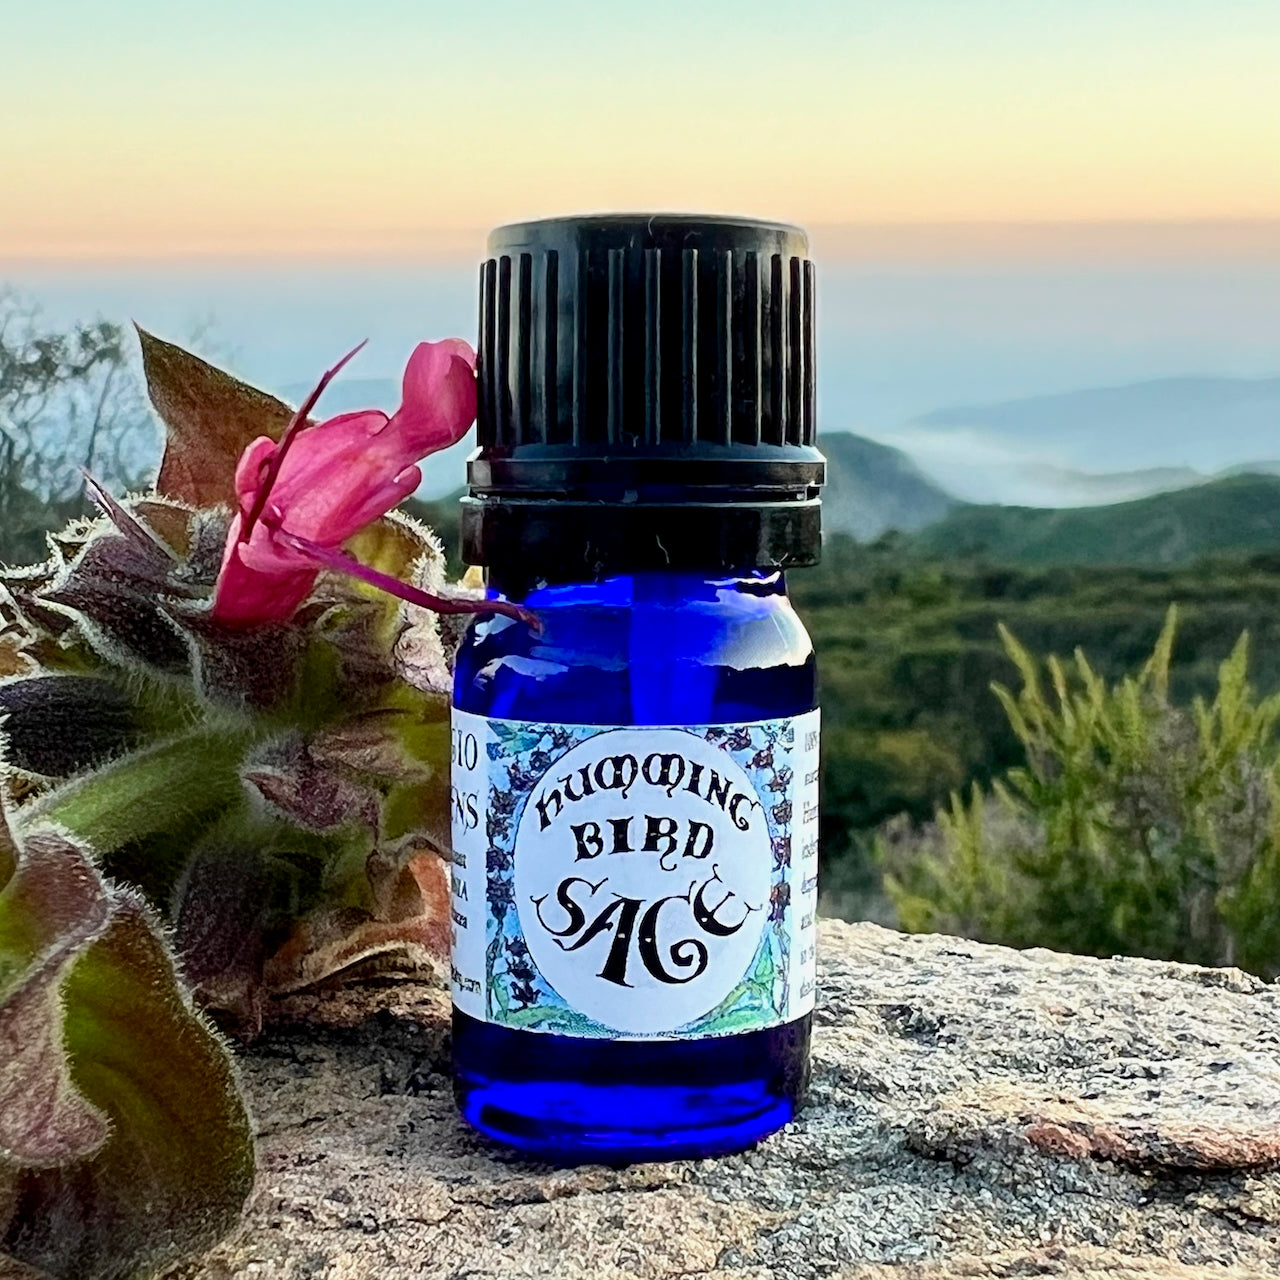 Photograph of Hummingbird Sage Essential oil in 5 ml cobalt blue glass bottle on a rock with Hummingbird Sage flower